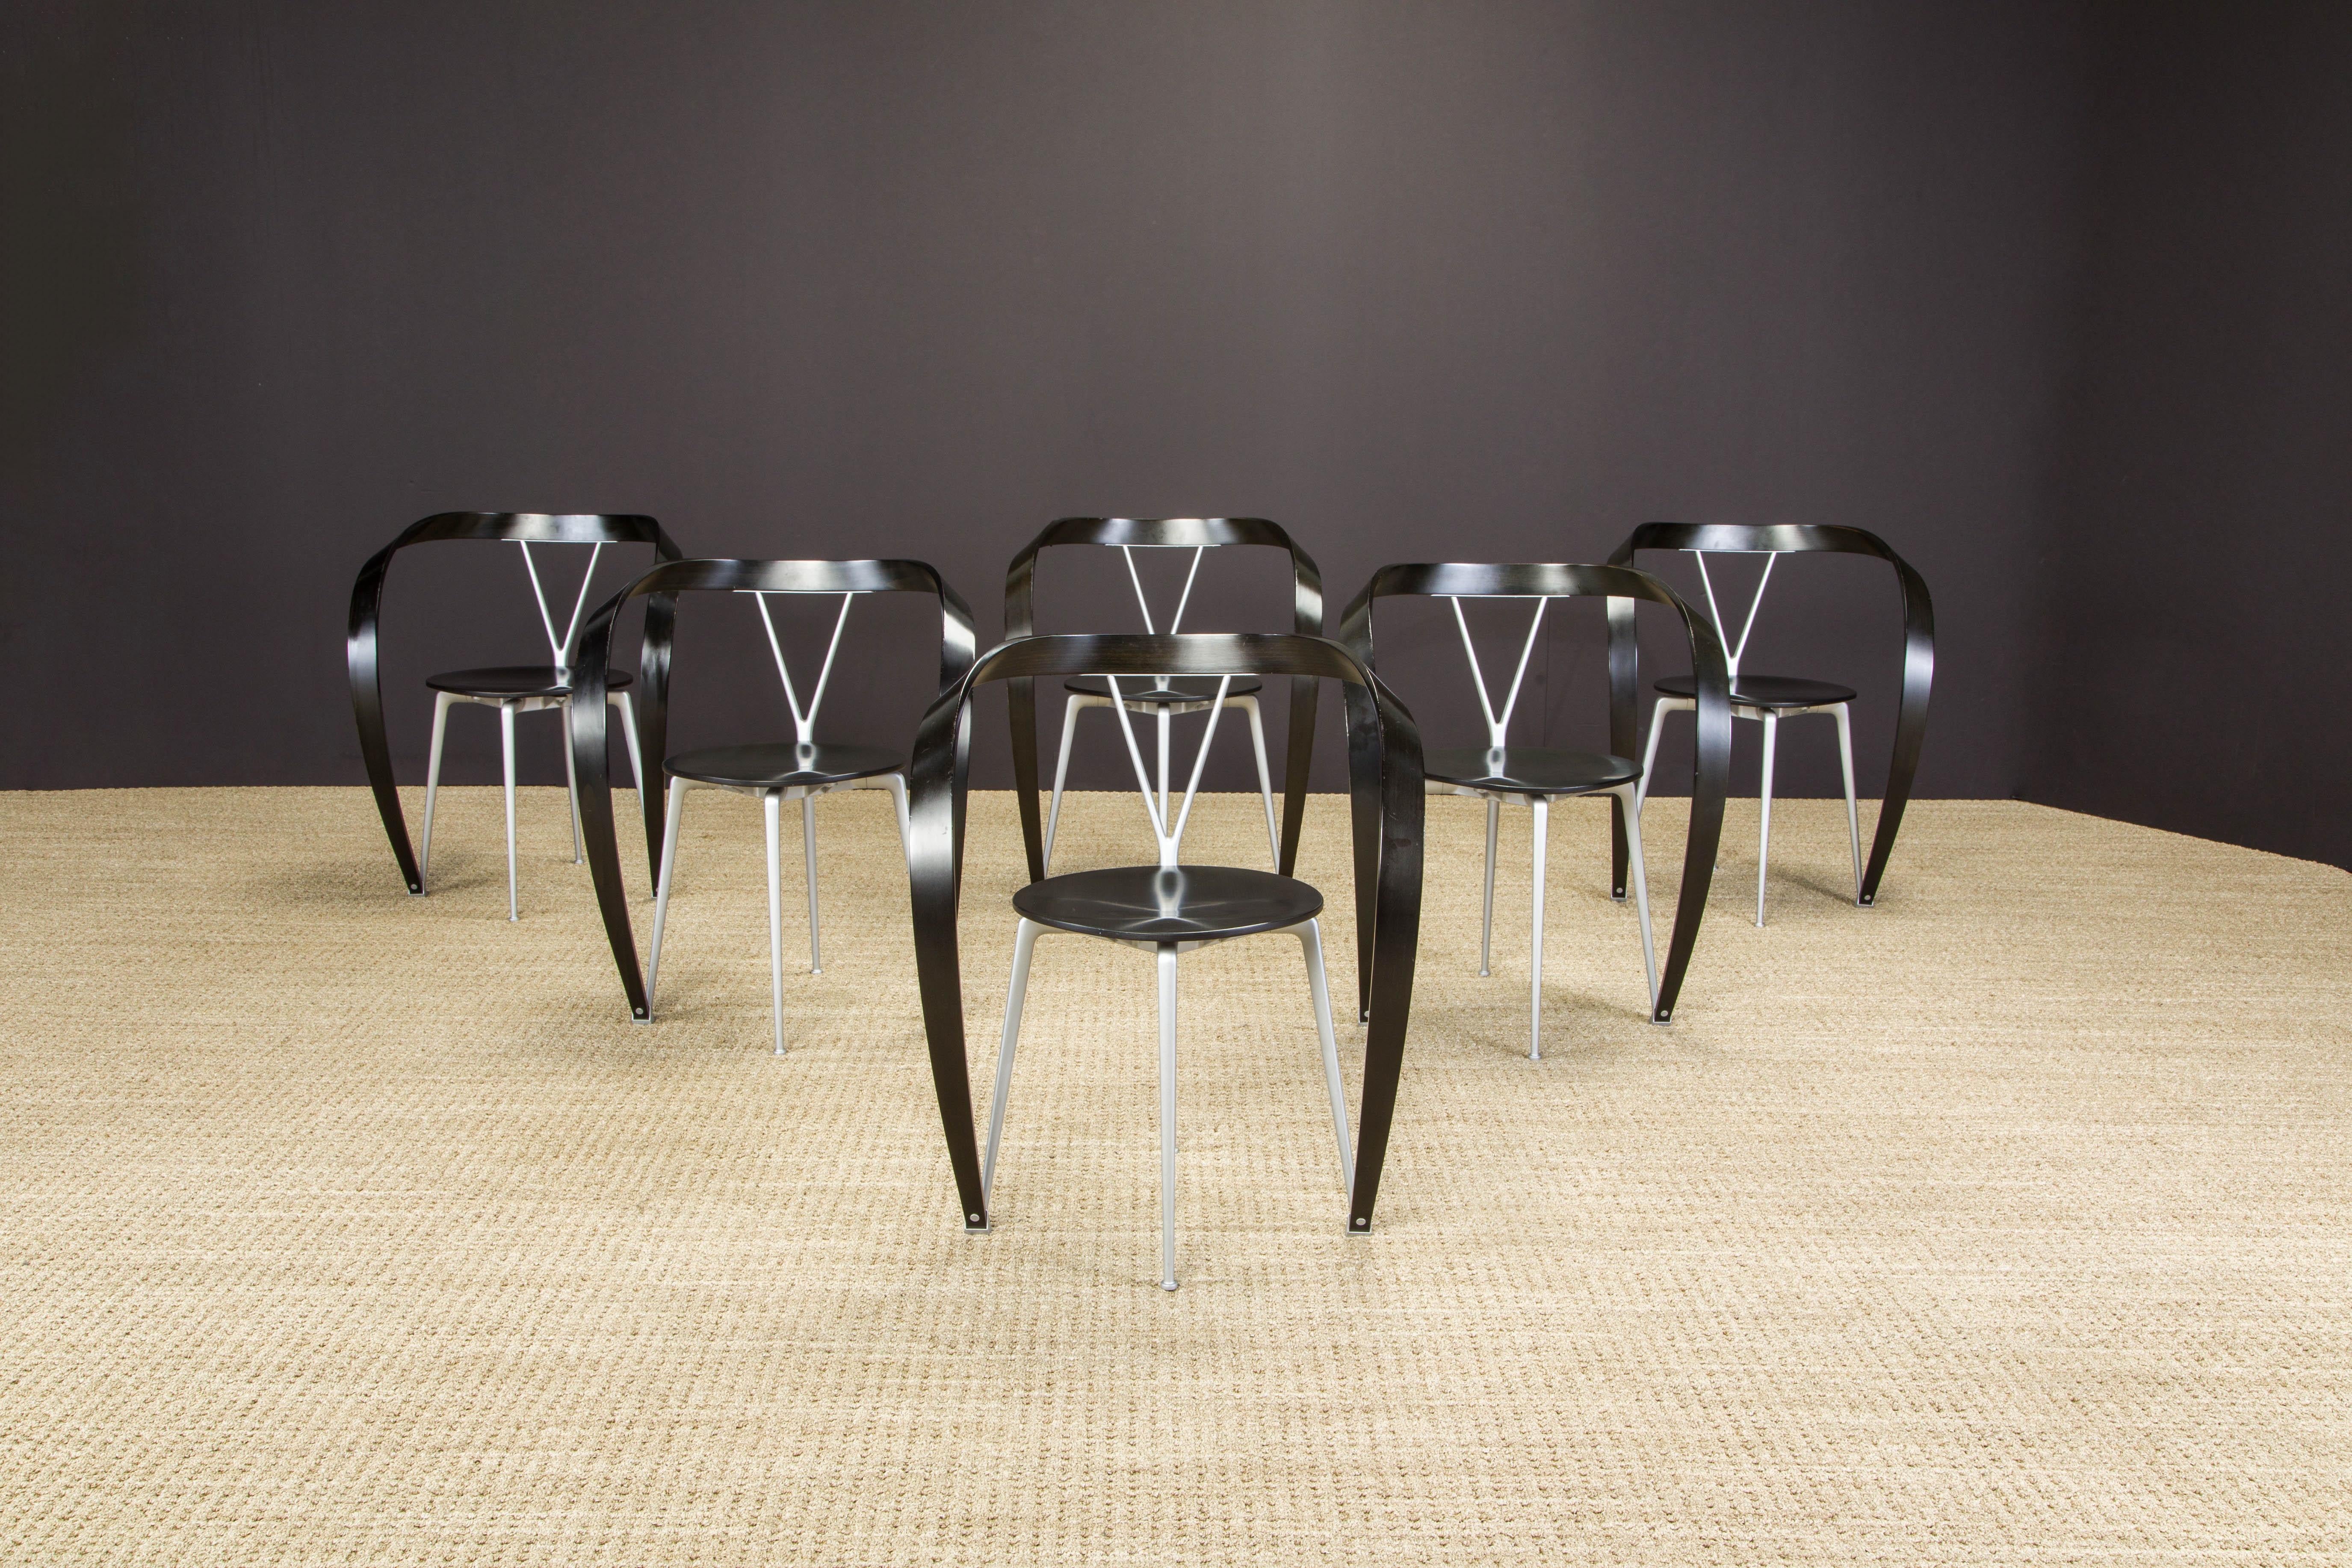 A beautiful set of six 'Revers' dining armchairs by Andrea Branzi for Cassina featuring ebonized beechwood arms sculpted in ribbon attaching to aluminum frames with matching ebonized seats. Signed with Cassina labels underneath the seats.